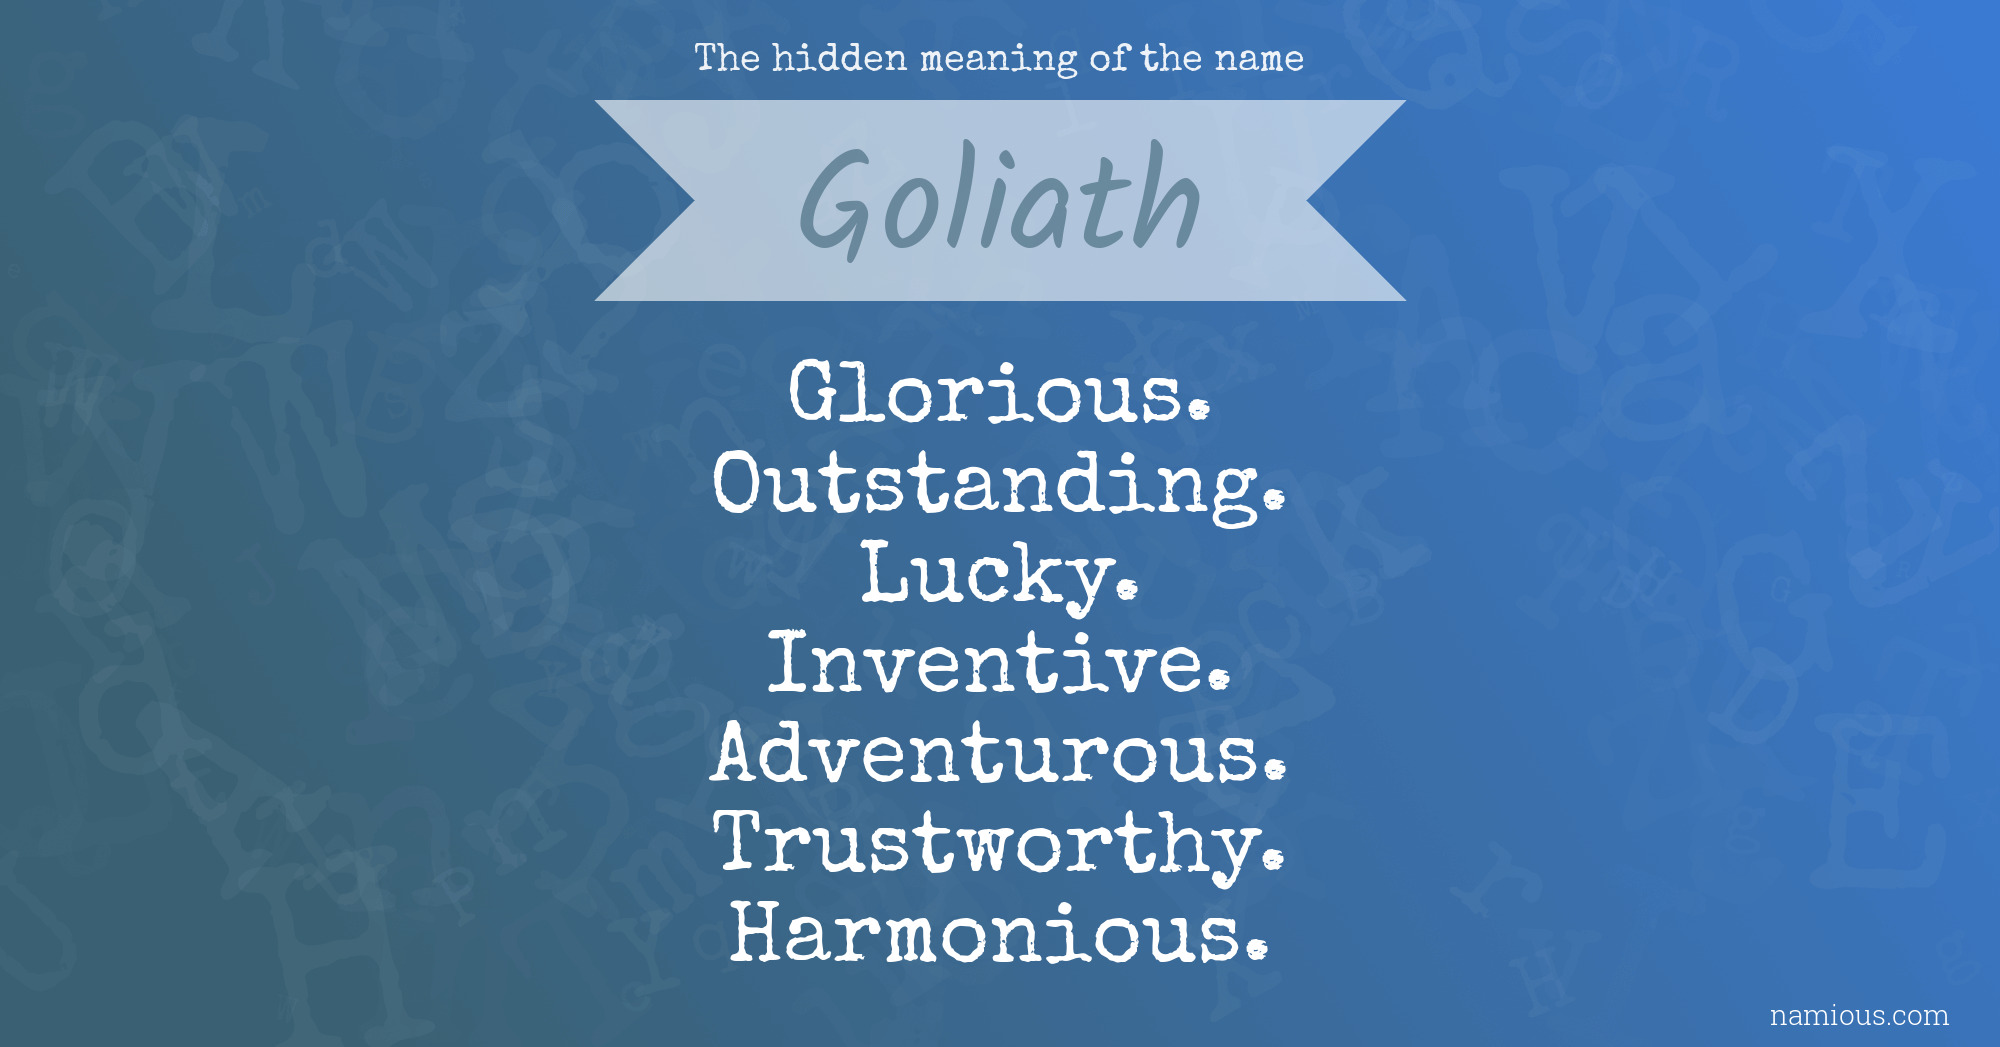 The hidden meaning of the name Goliath